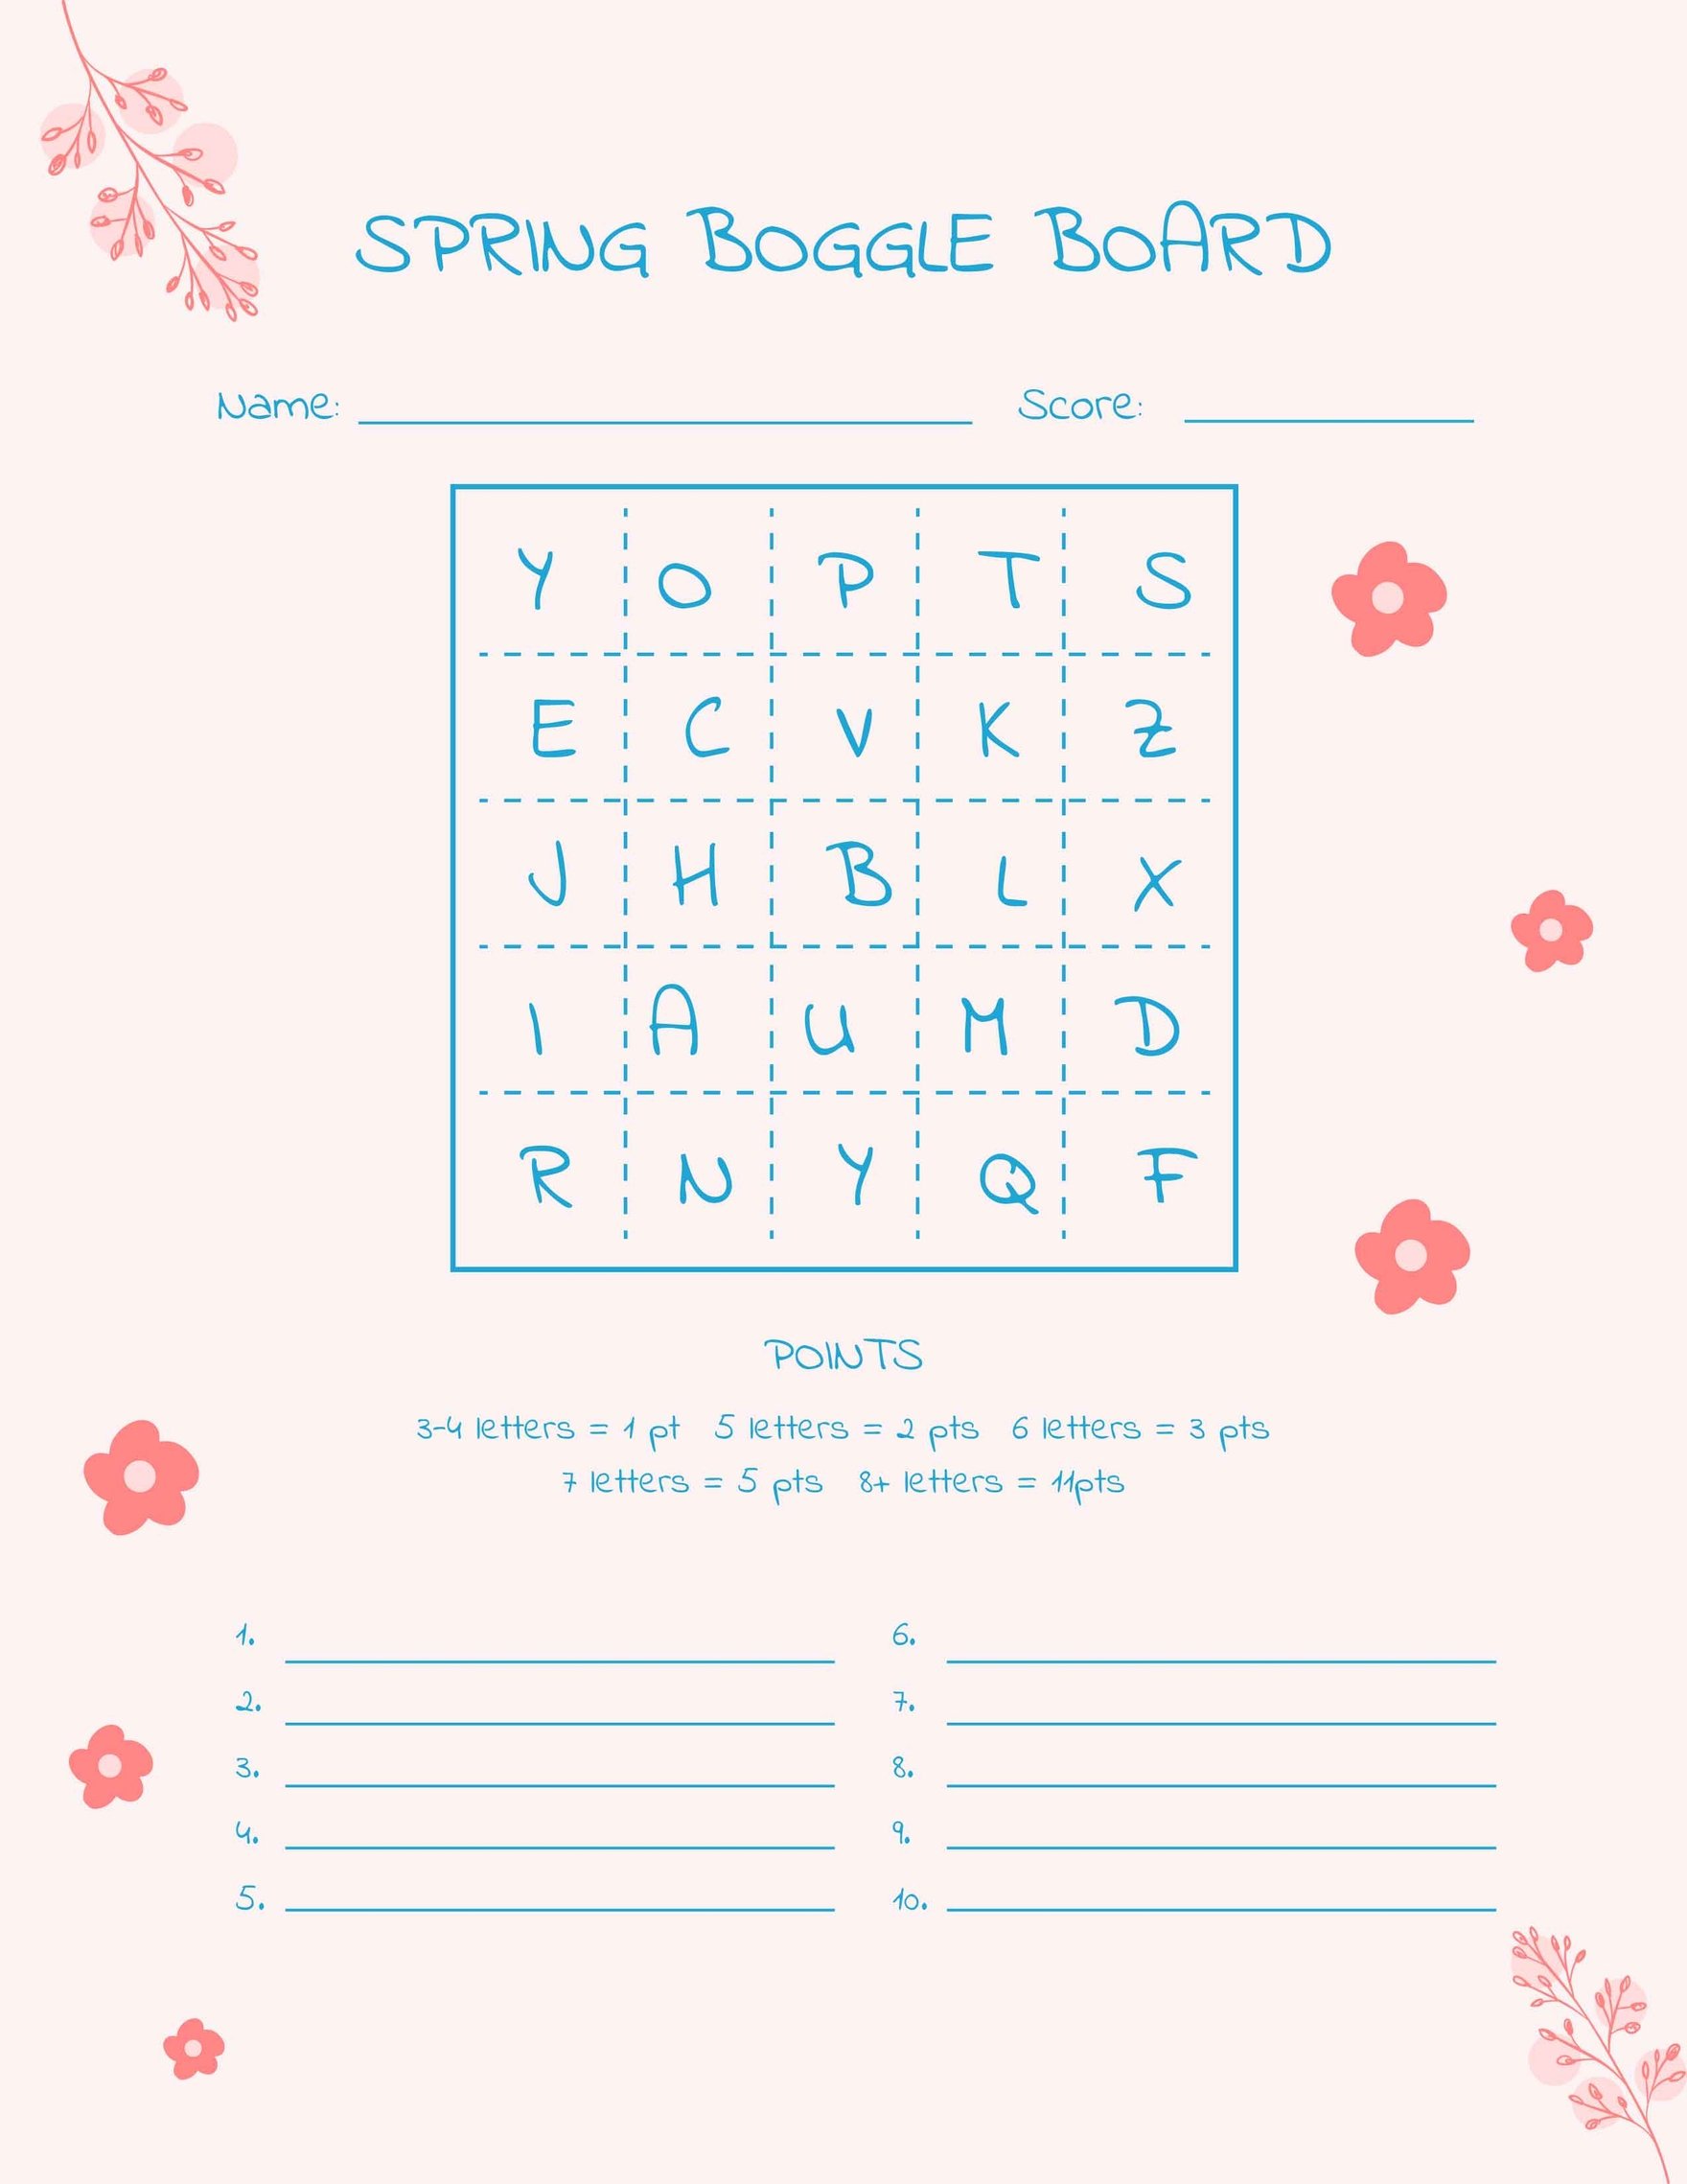 Spring Boggle Board Template in Word, Google Docs, PDF, Apple Pages